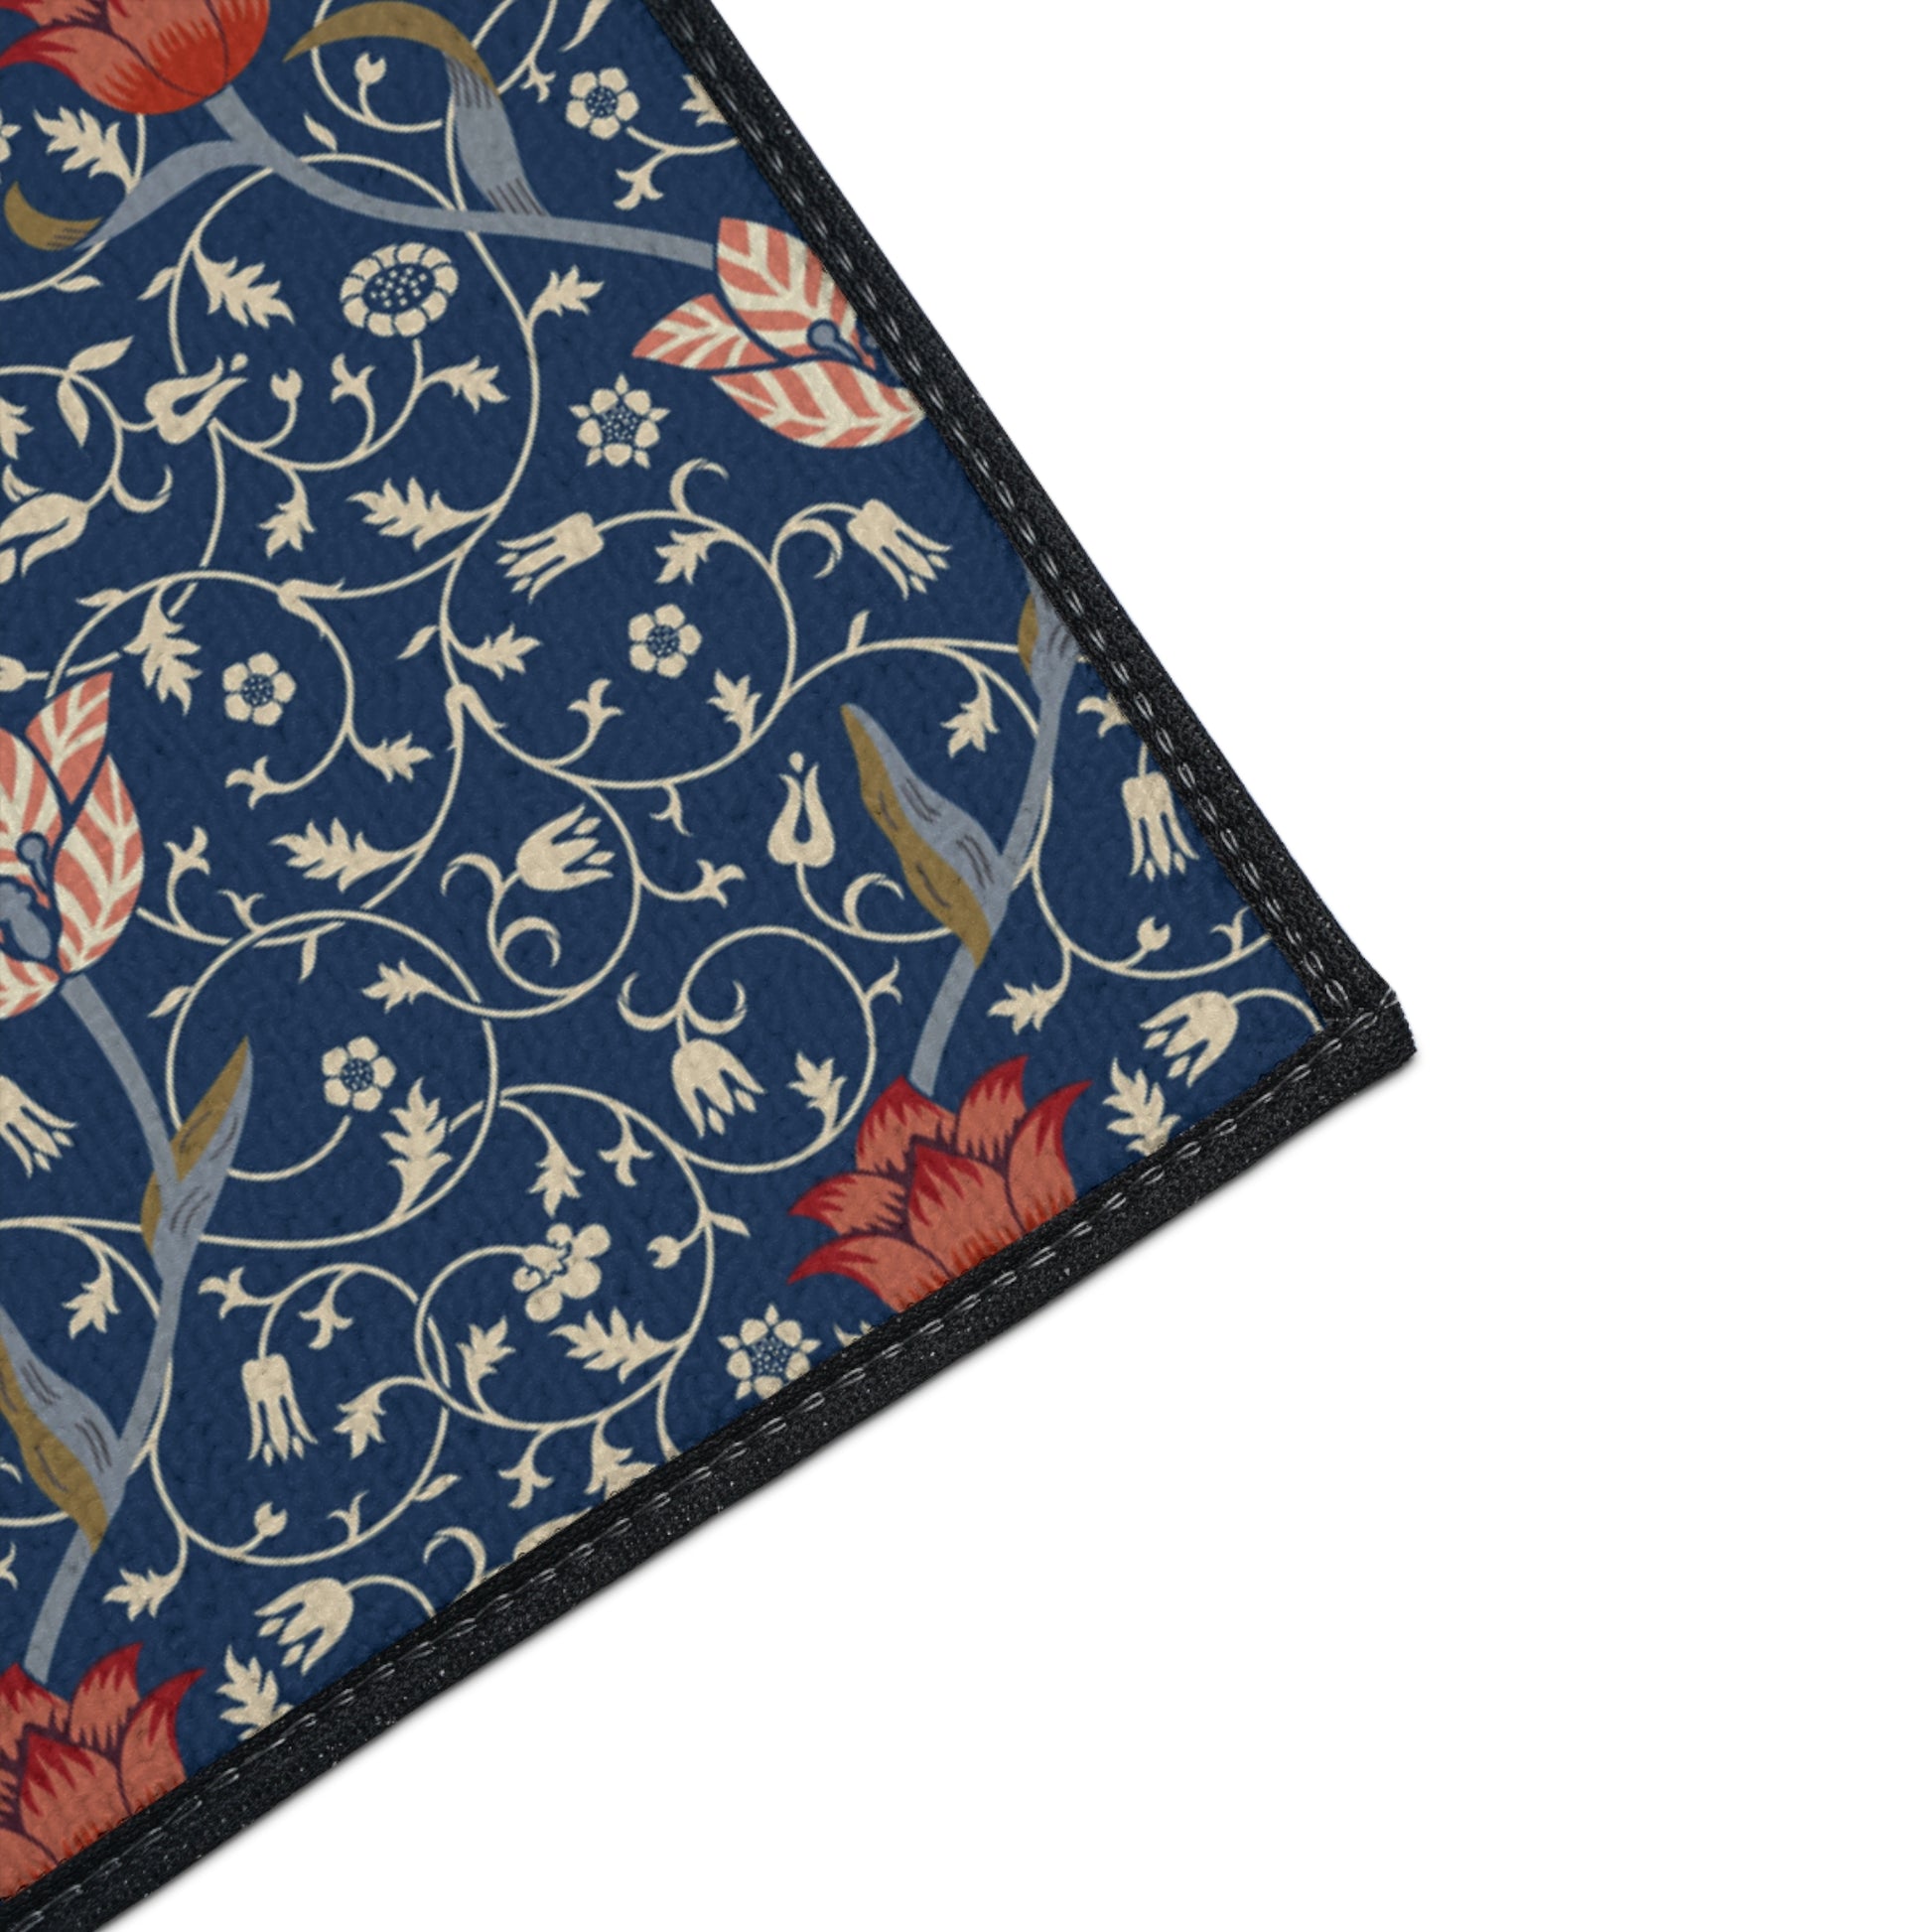 william-morris-co-heavy-duty-floor-mat-medway-collection-10